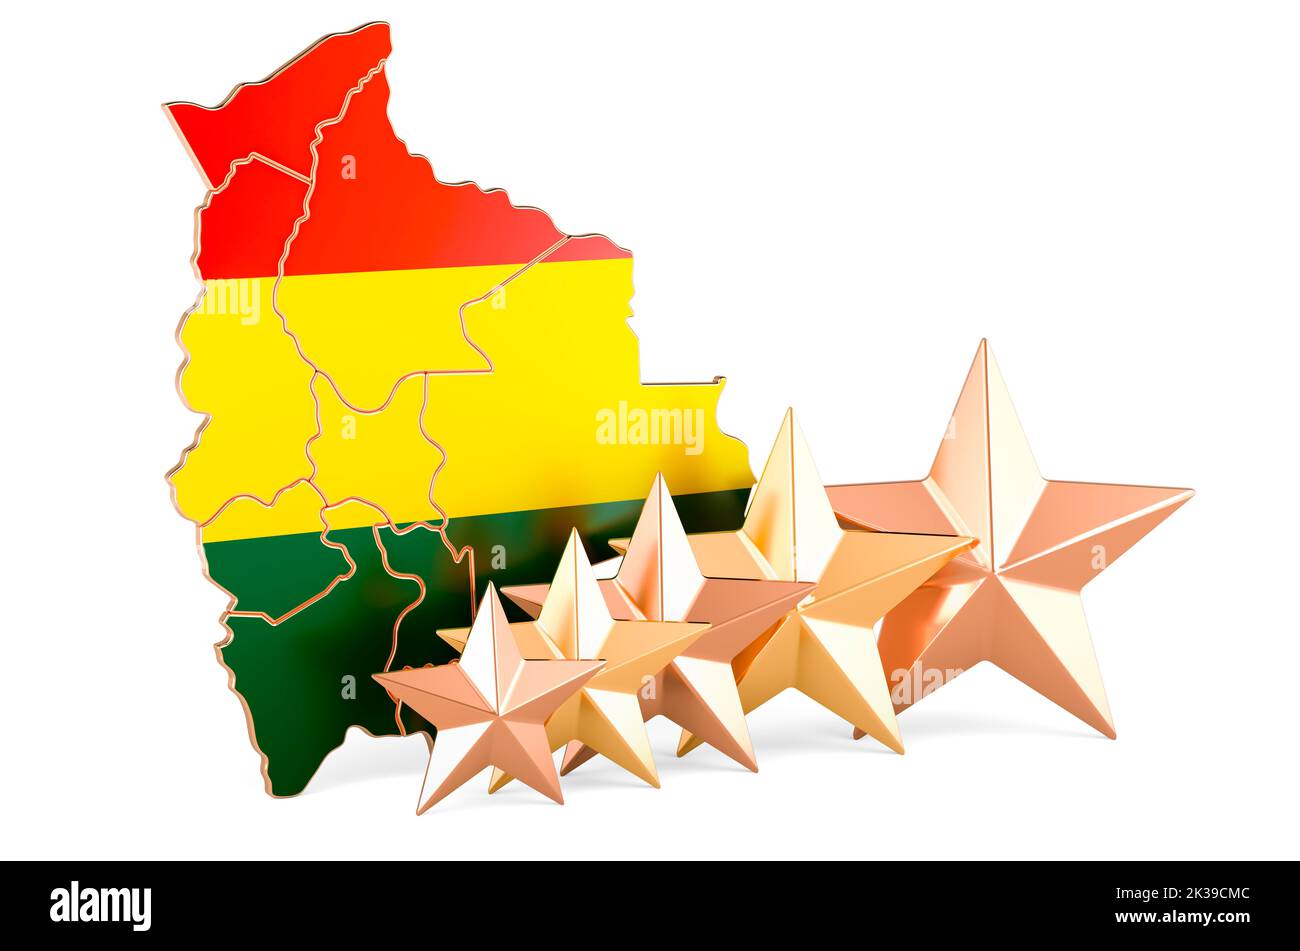 Bolivian map with five stars. Rating, quality, service in Bolivia. 3D rendering isolated on white background Stock Photo